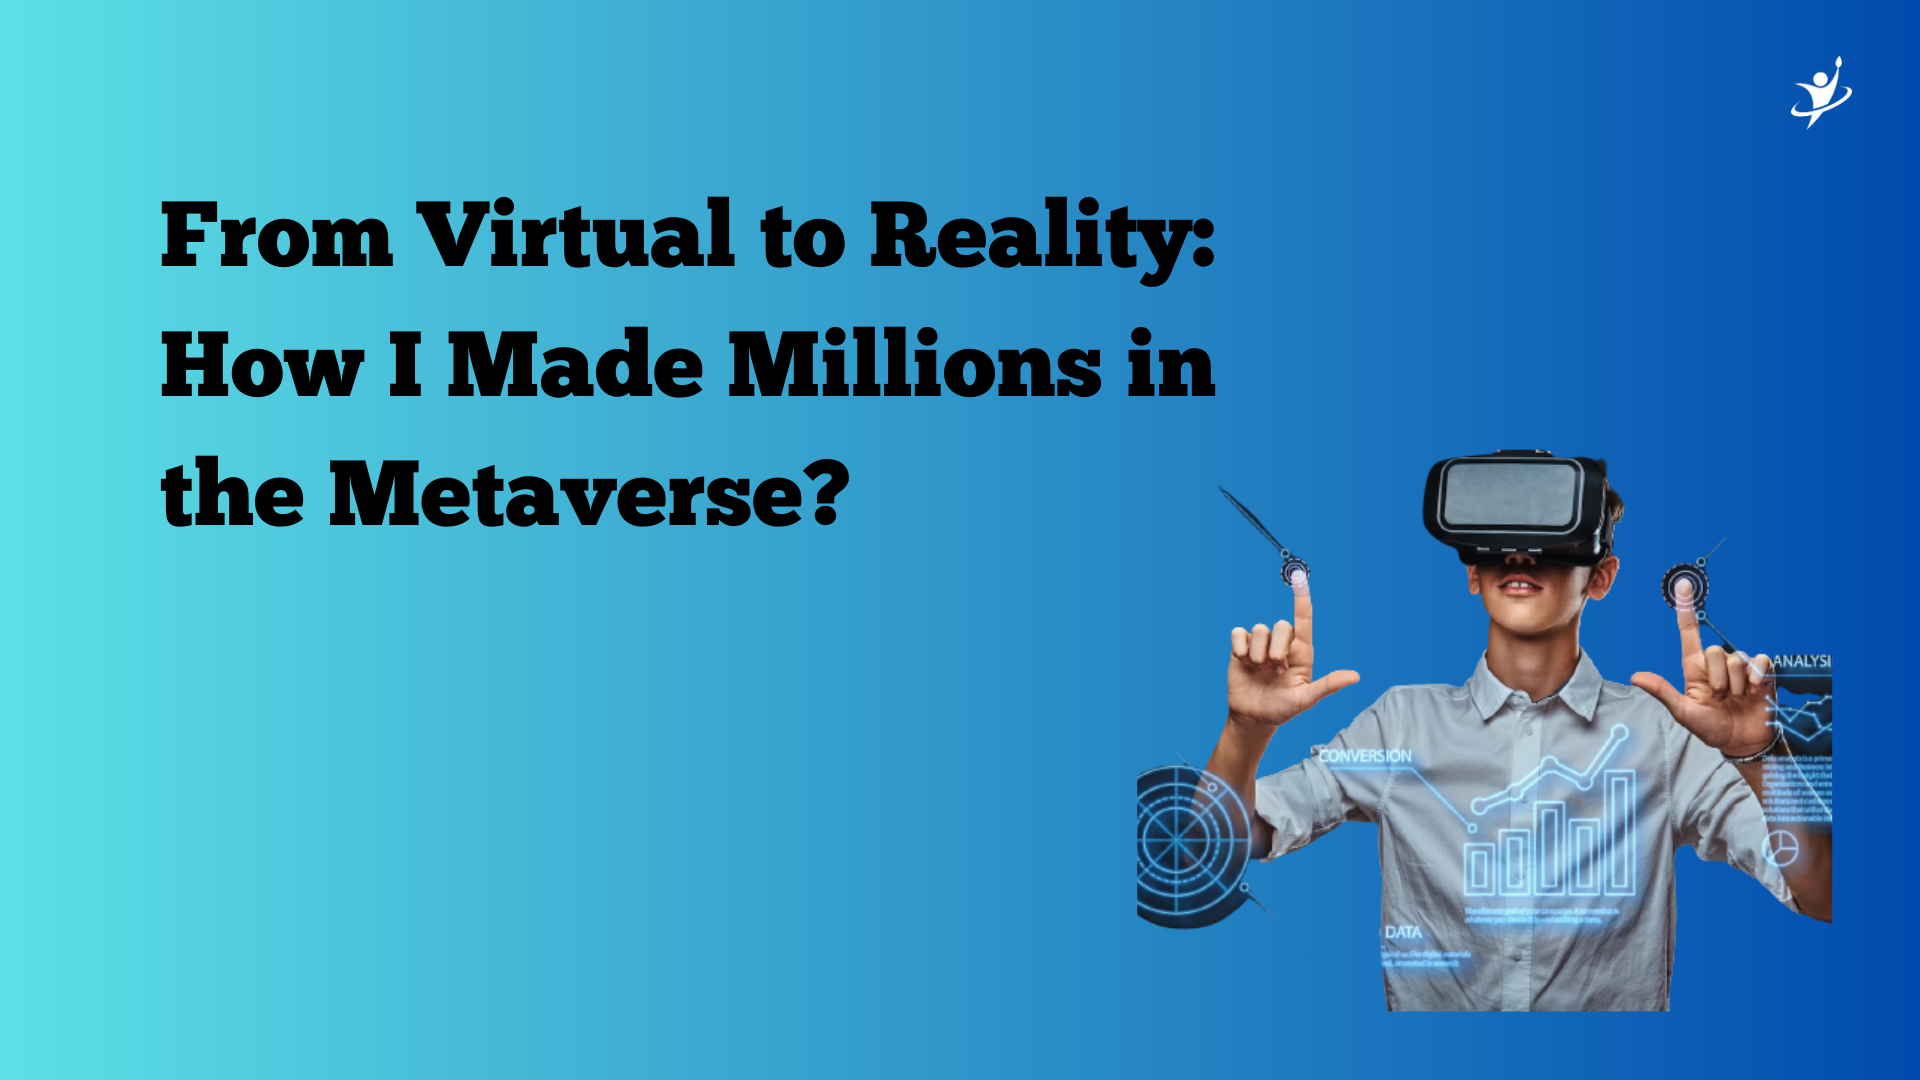 Made millions with Metaverse